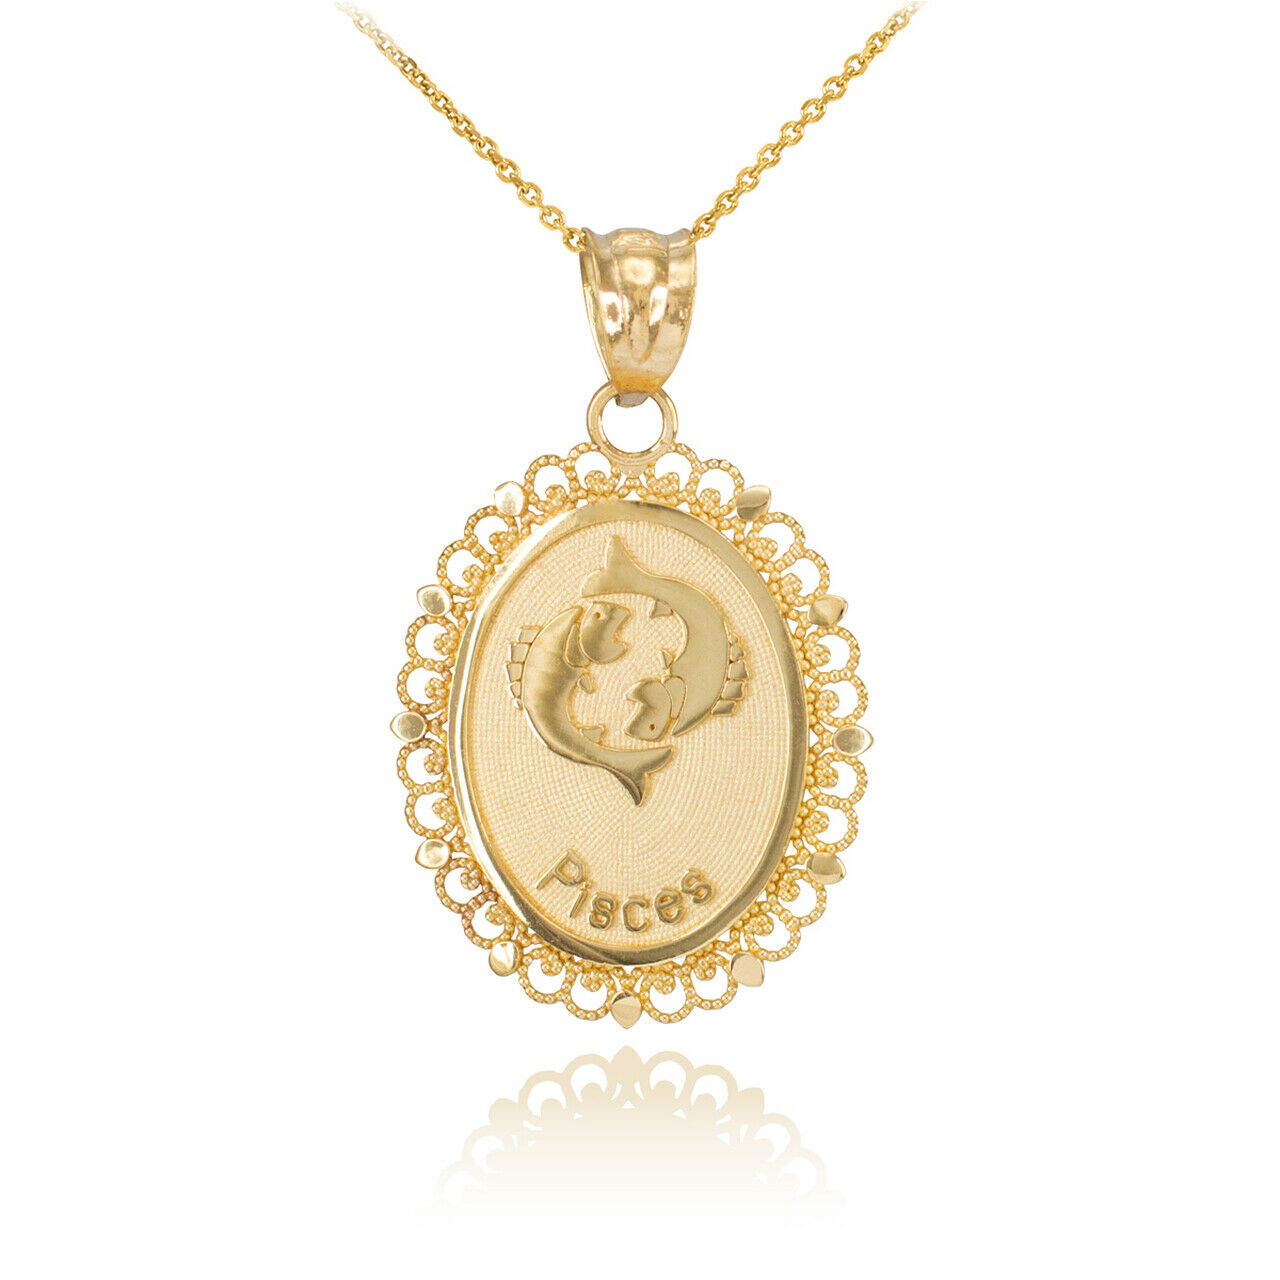 10k Solid Gold Pisces Zodiac Sign Filigree Oval Pendant Necklace